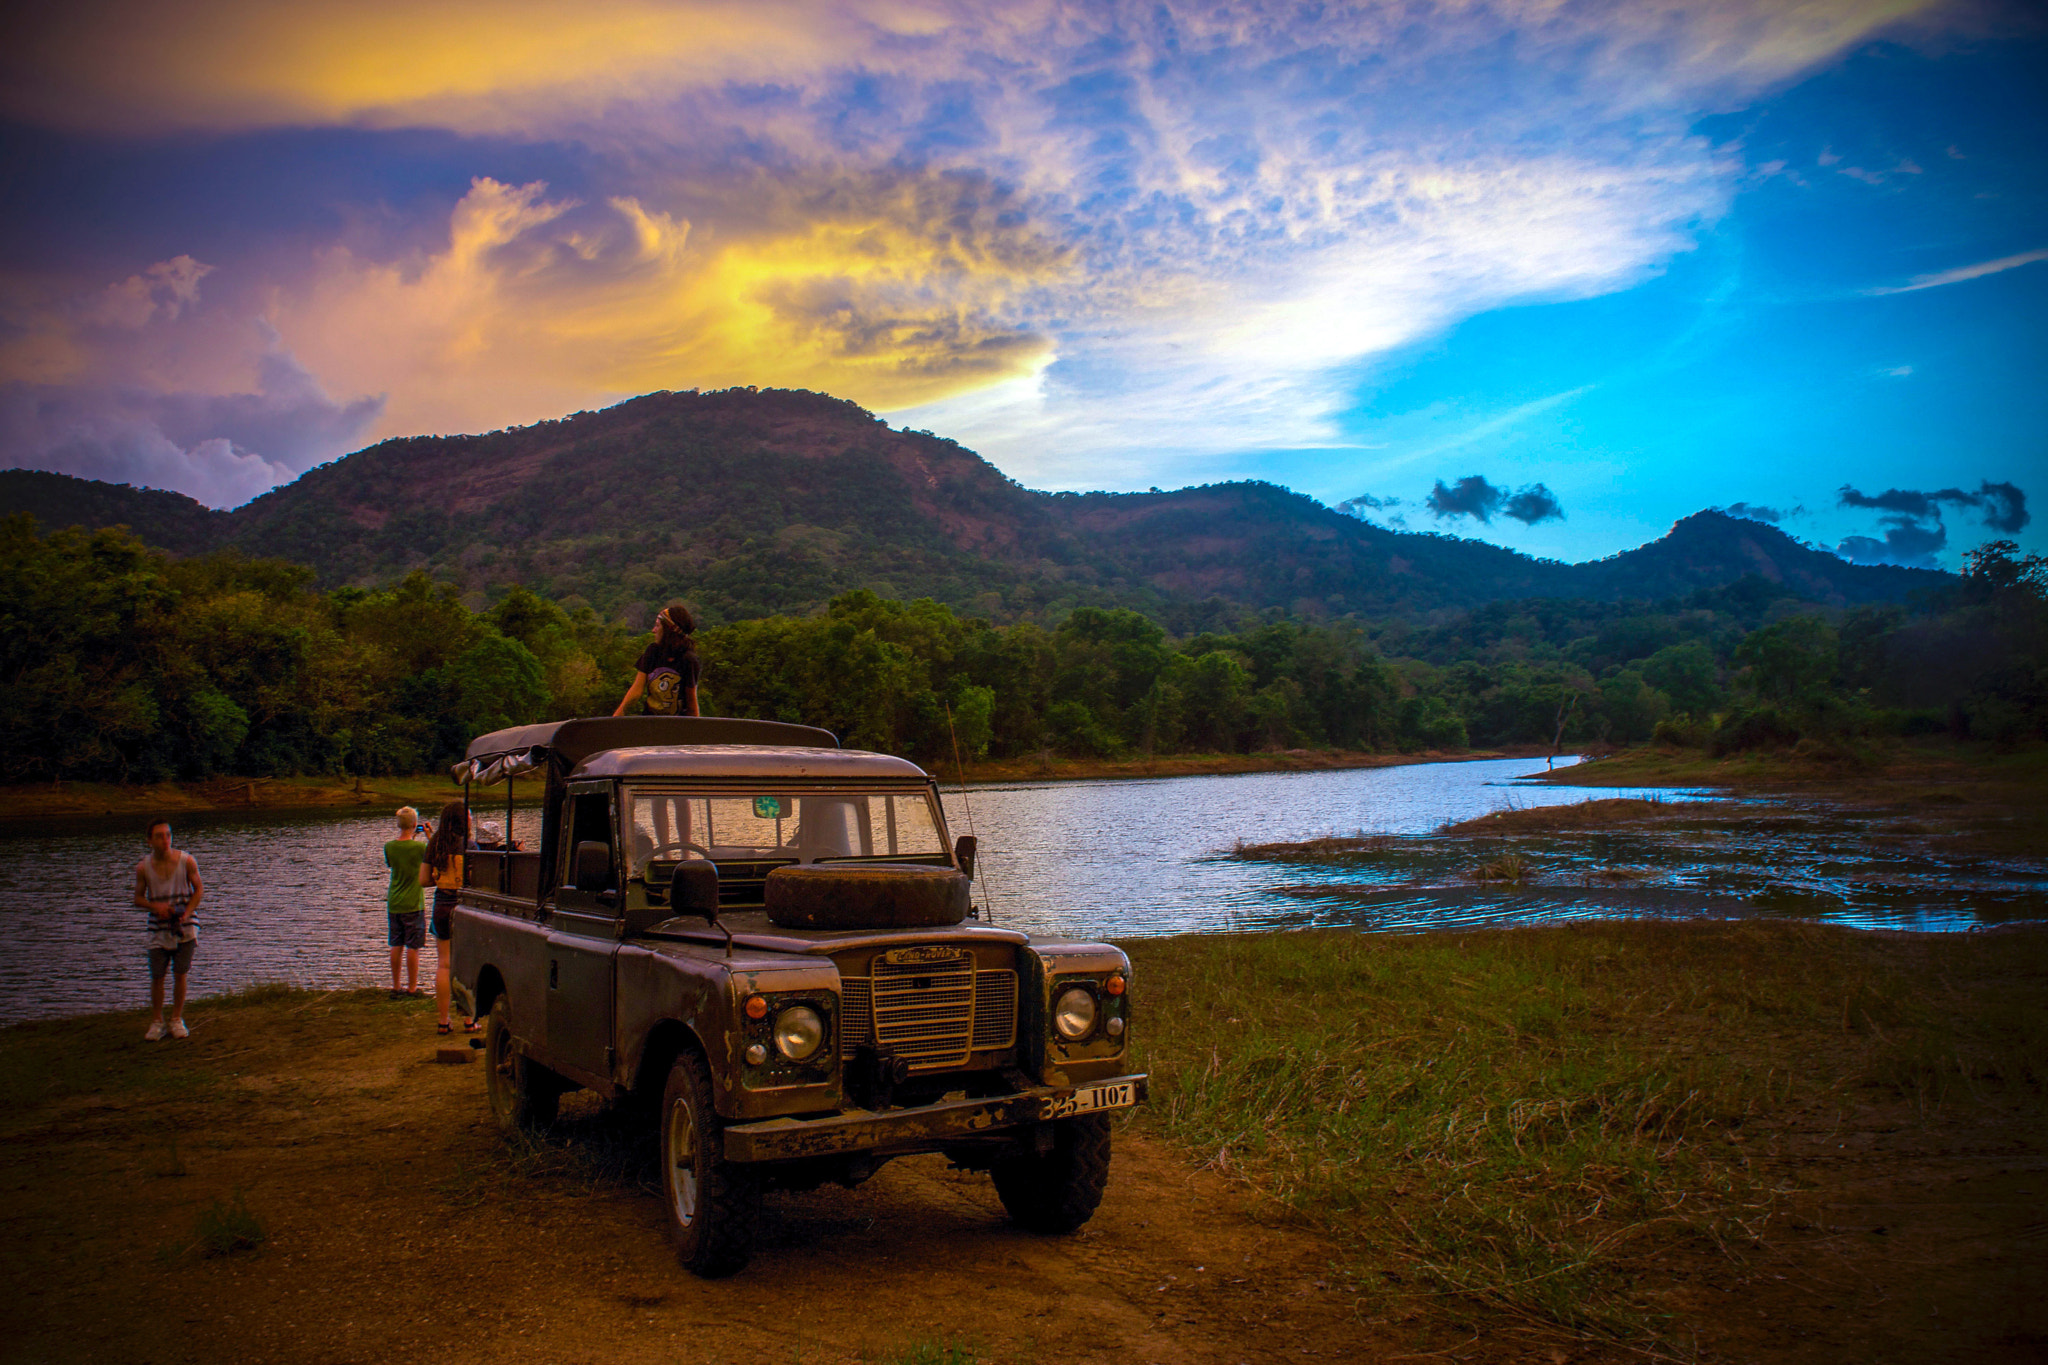 Sony Alpha NEX-7 sample photo. Land rover from the 70's parked at a lake in wasgamua, sri lanka, after a search for wild elephants photography